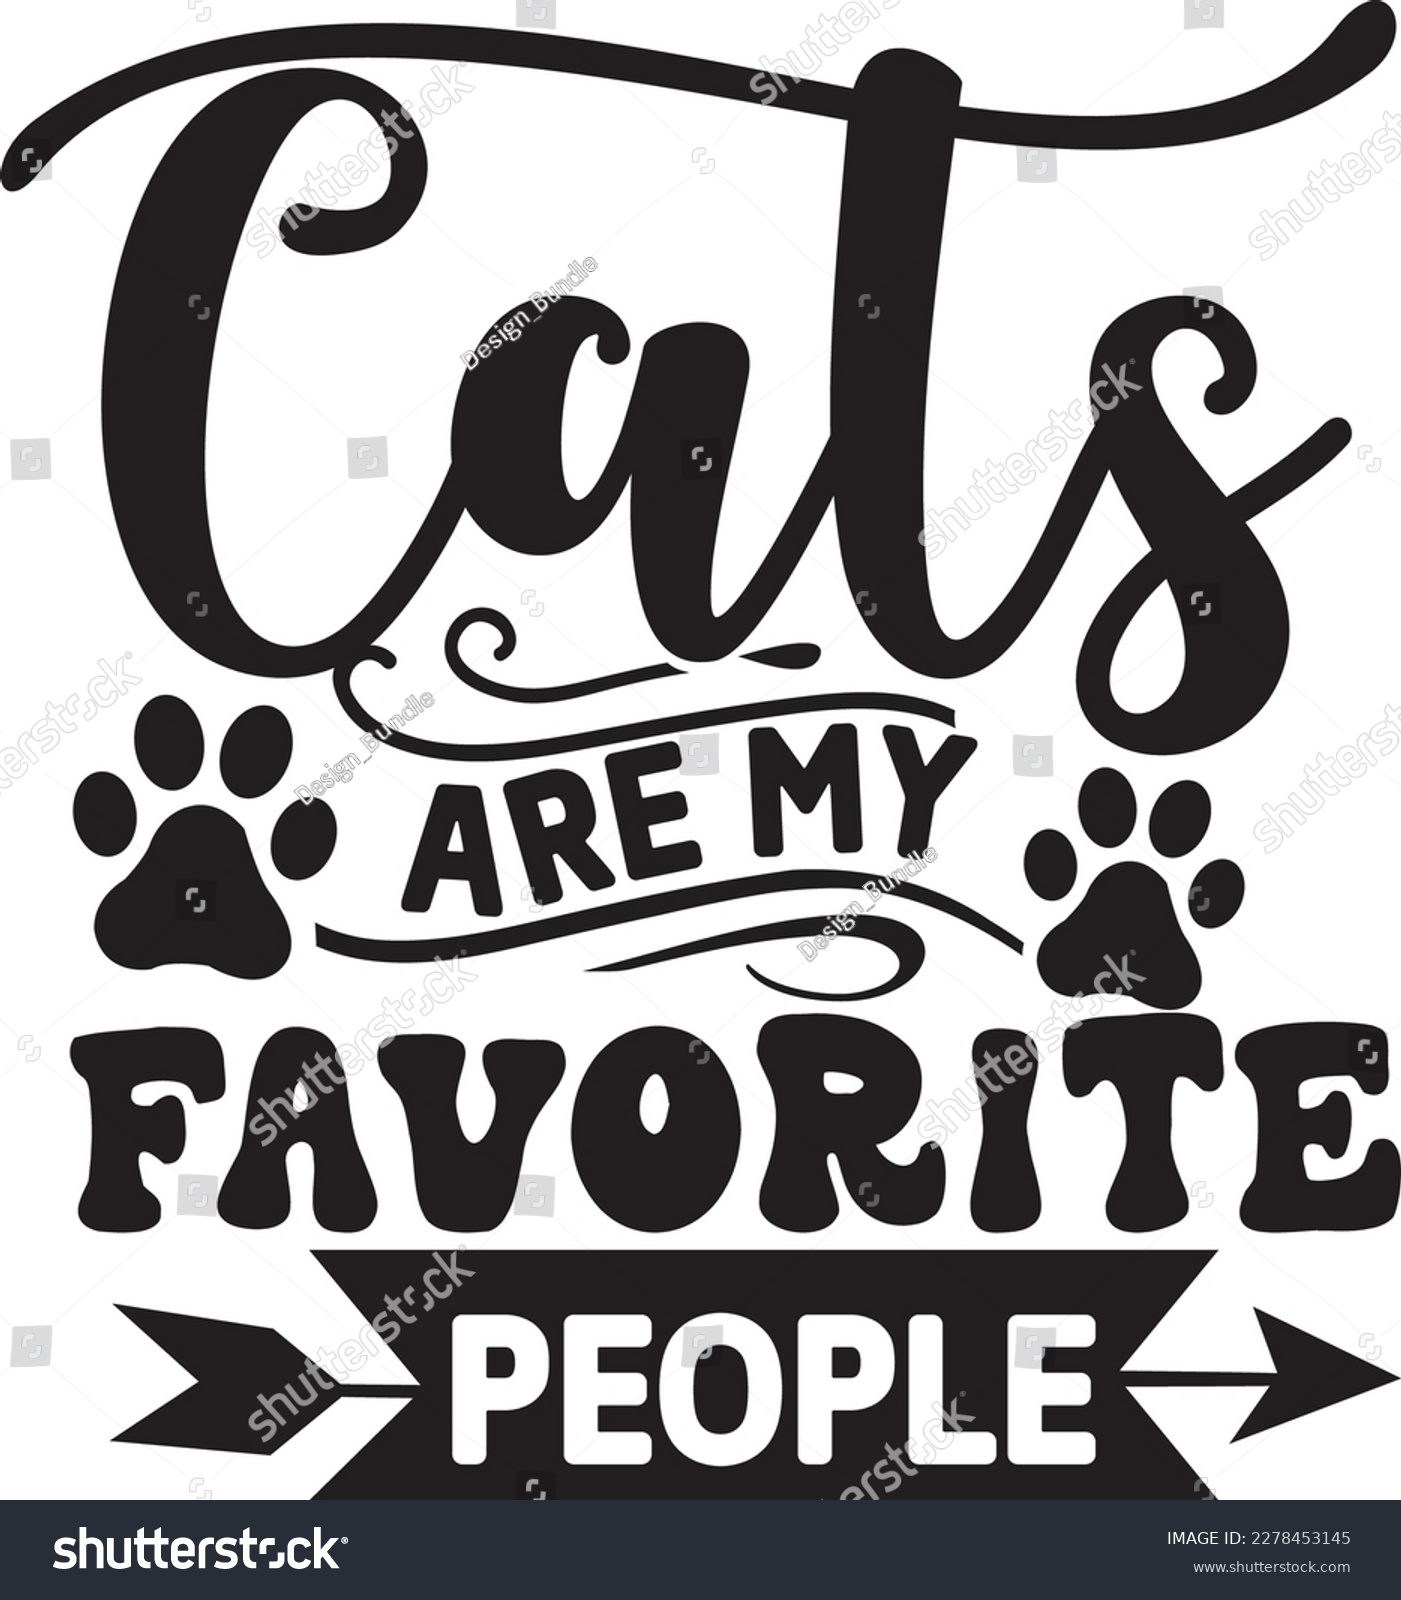 SVG of Cats Are My Favorite People svg , cat SVG design, cat SVG, cat SVG bundle, cat design, quotes design svg